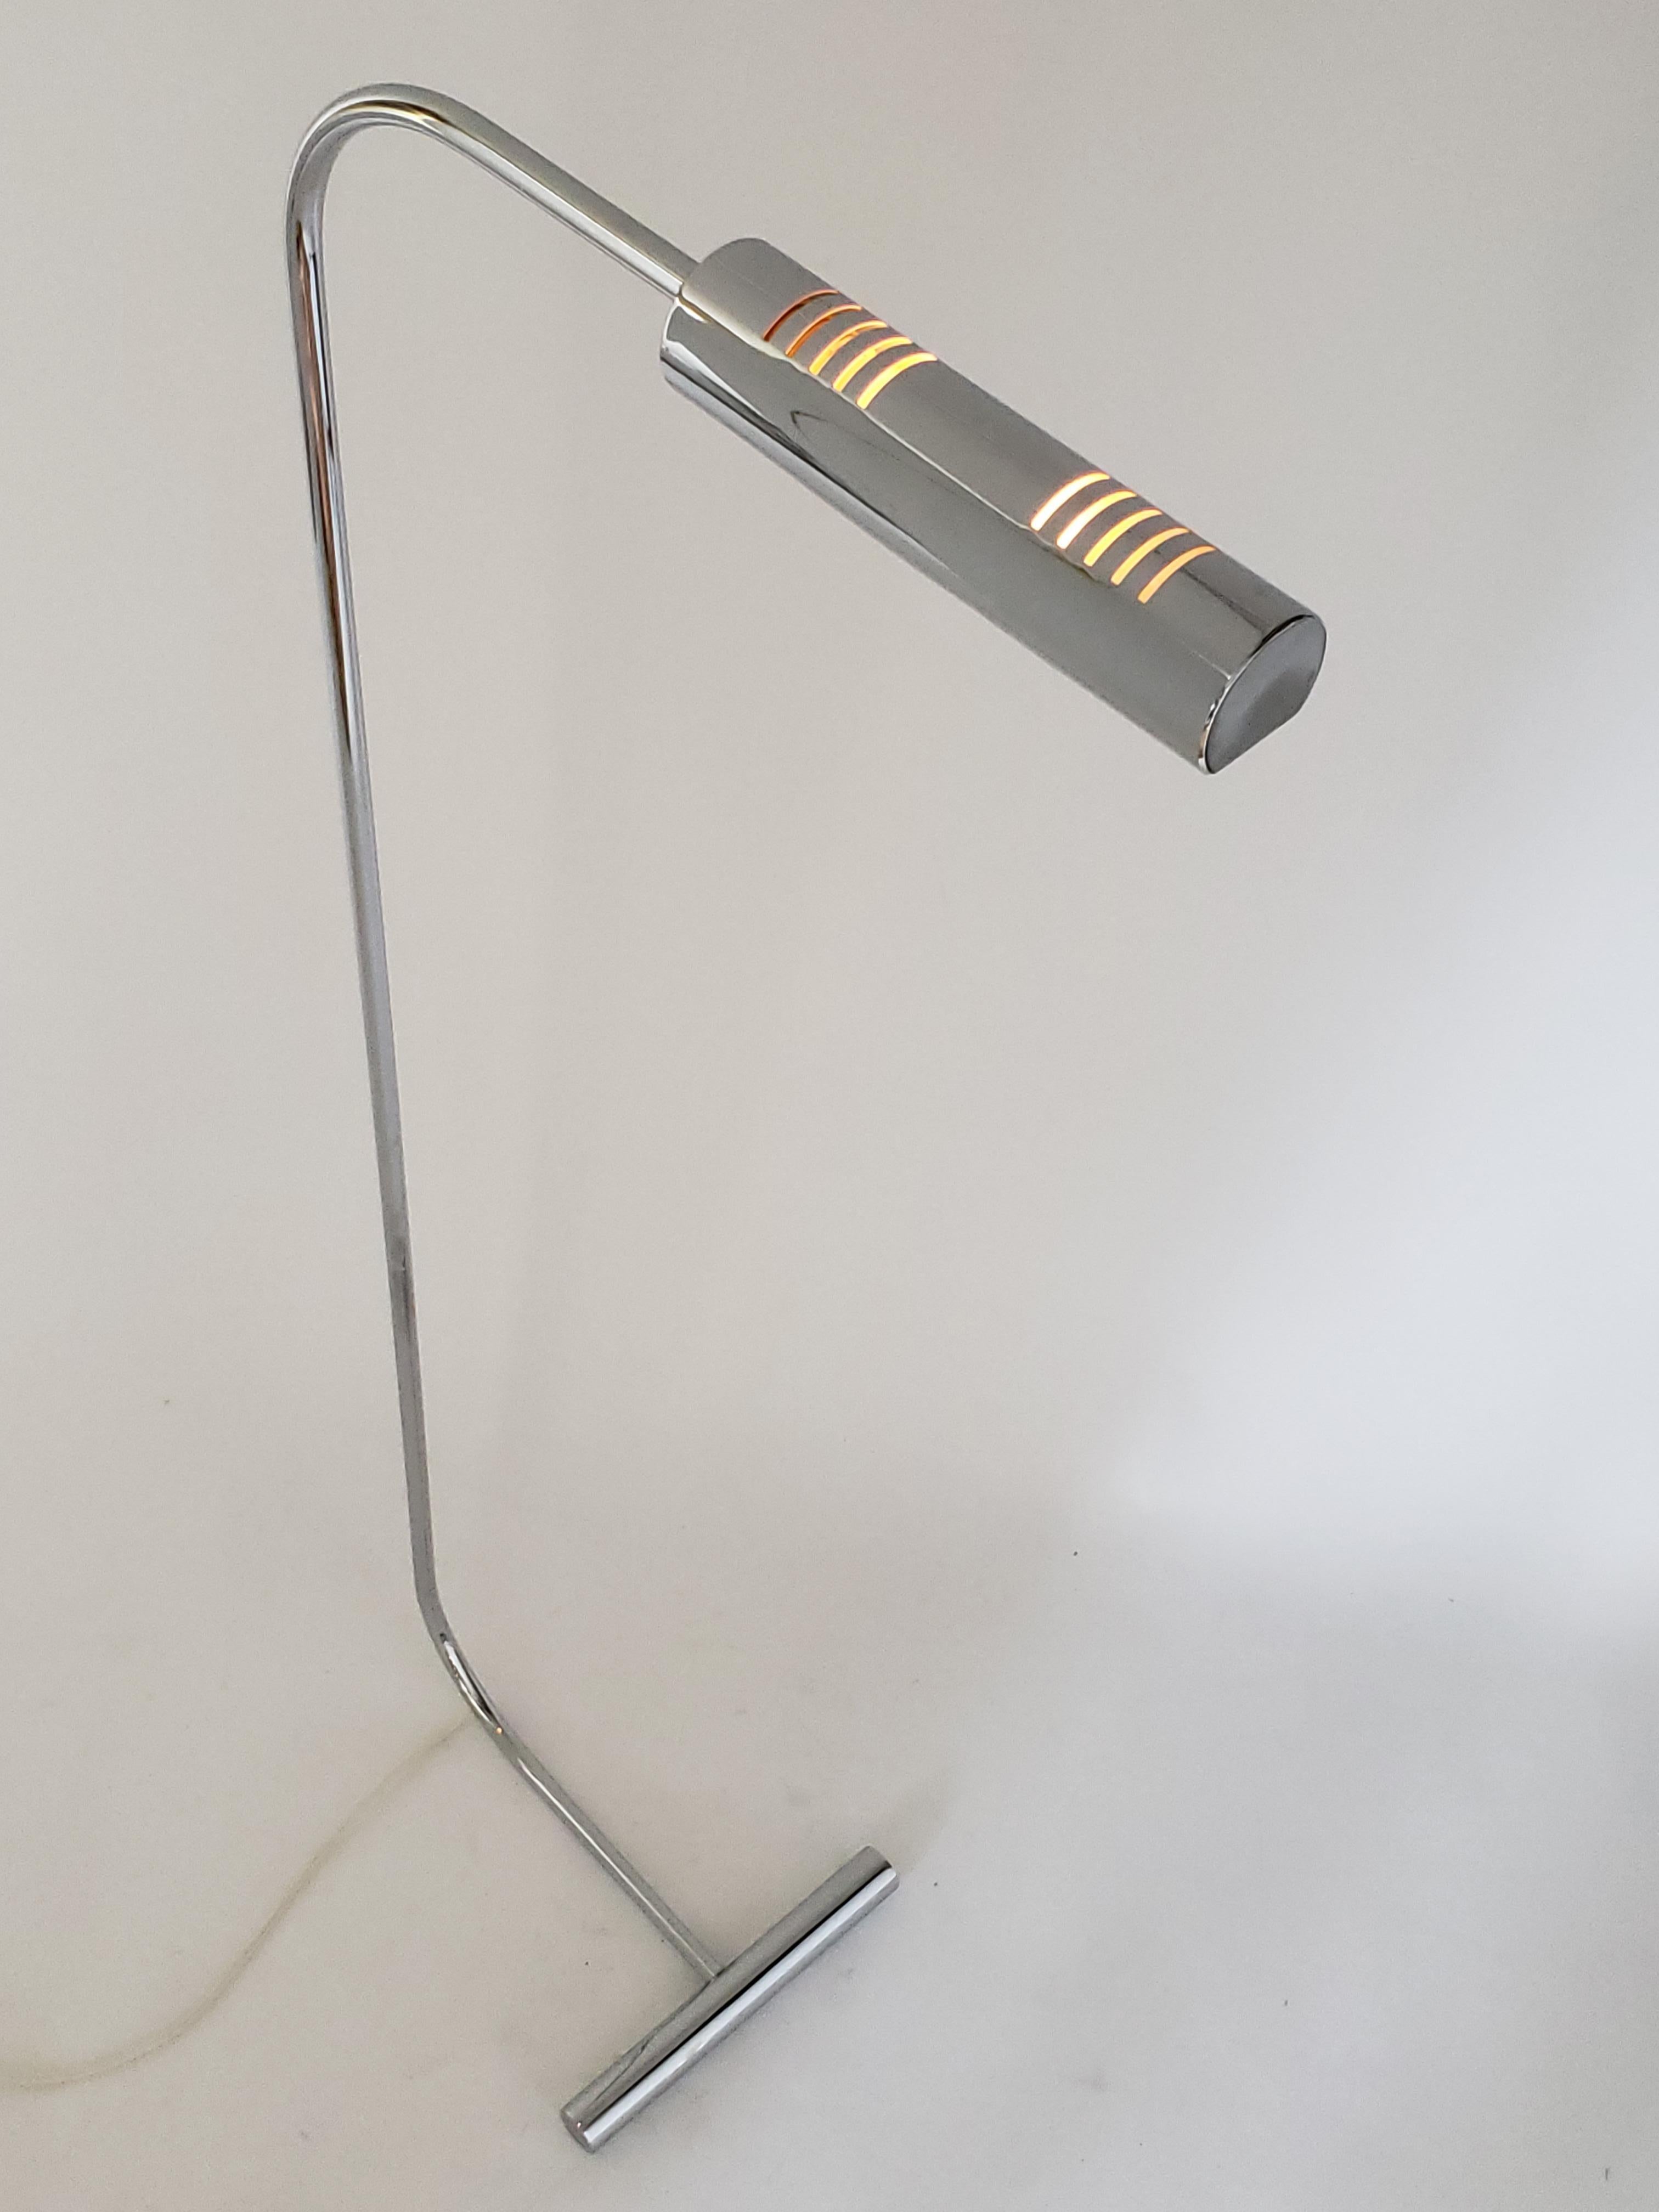 Minimalist modern floor reading lamp in the style of Cedric Hartman. 

Sturdy, well made construction. 

Heavy solid steel chromed base. 

Vented chrome shade measure 10 inches long. 

Contain one E26 size ceramic socket rated at 60 watt.